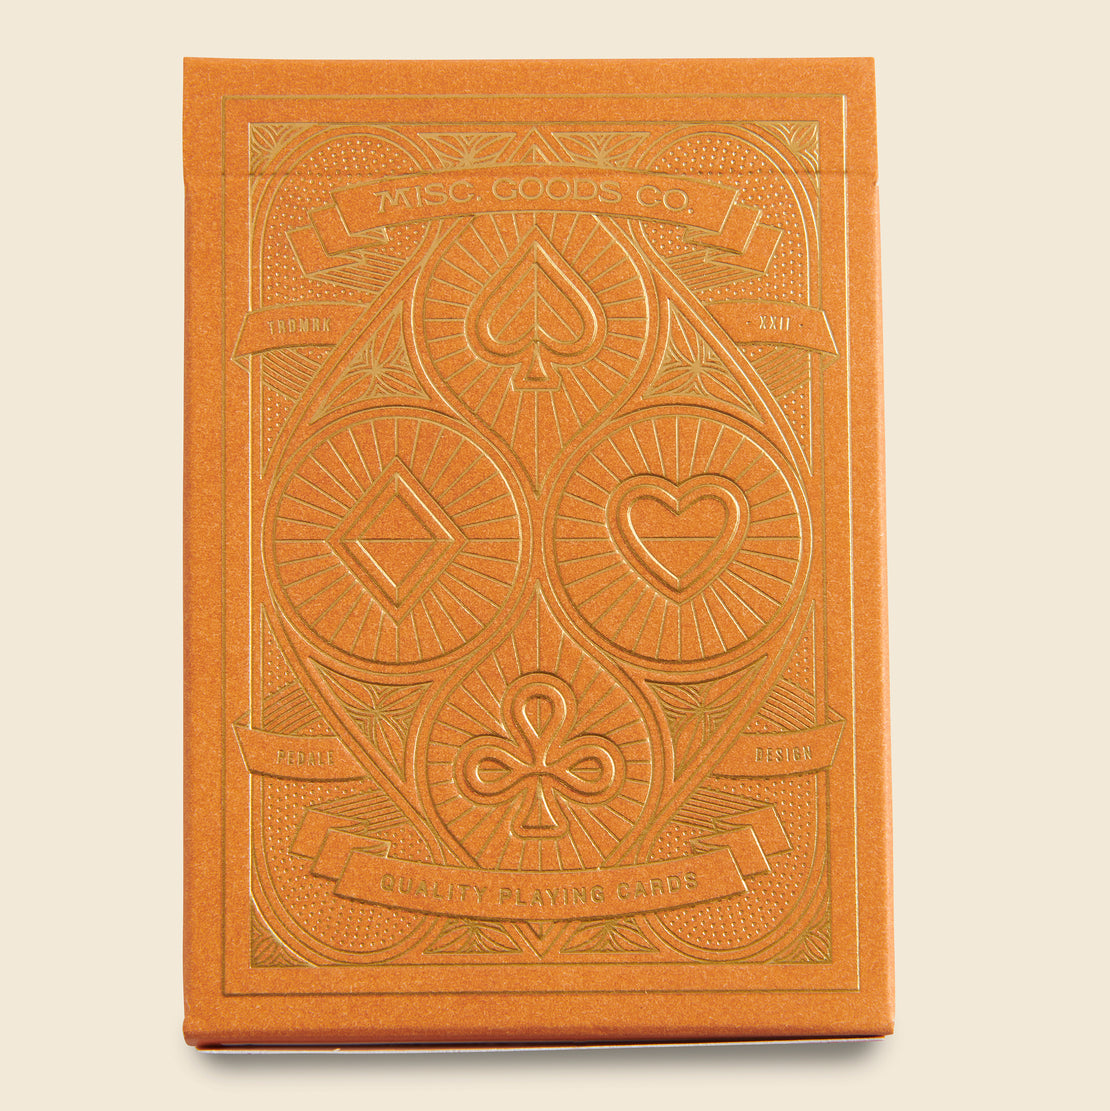 Sandstone Playing Cards